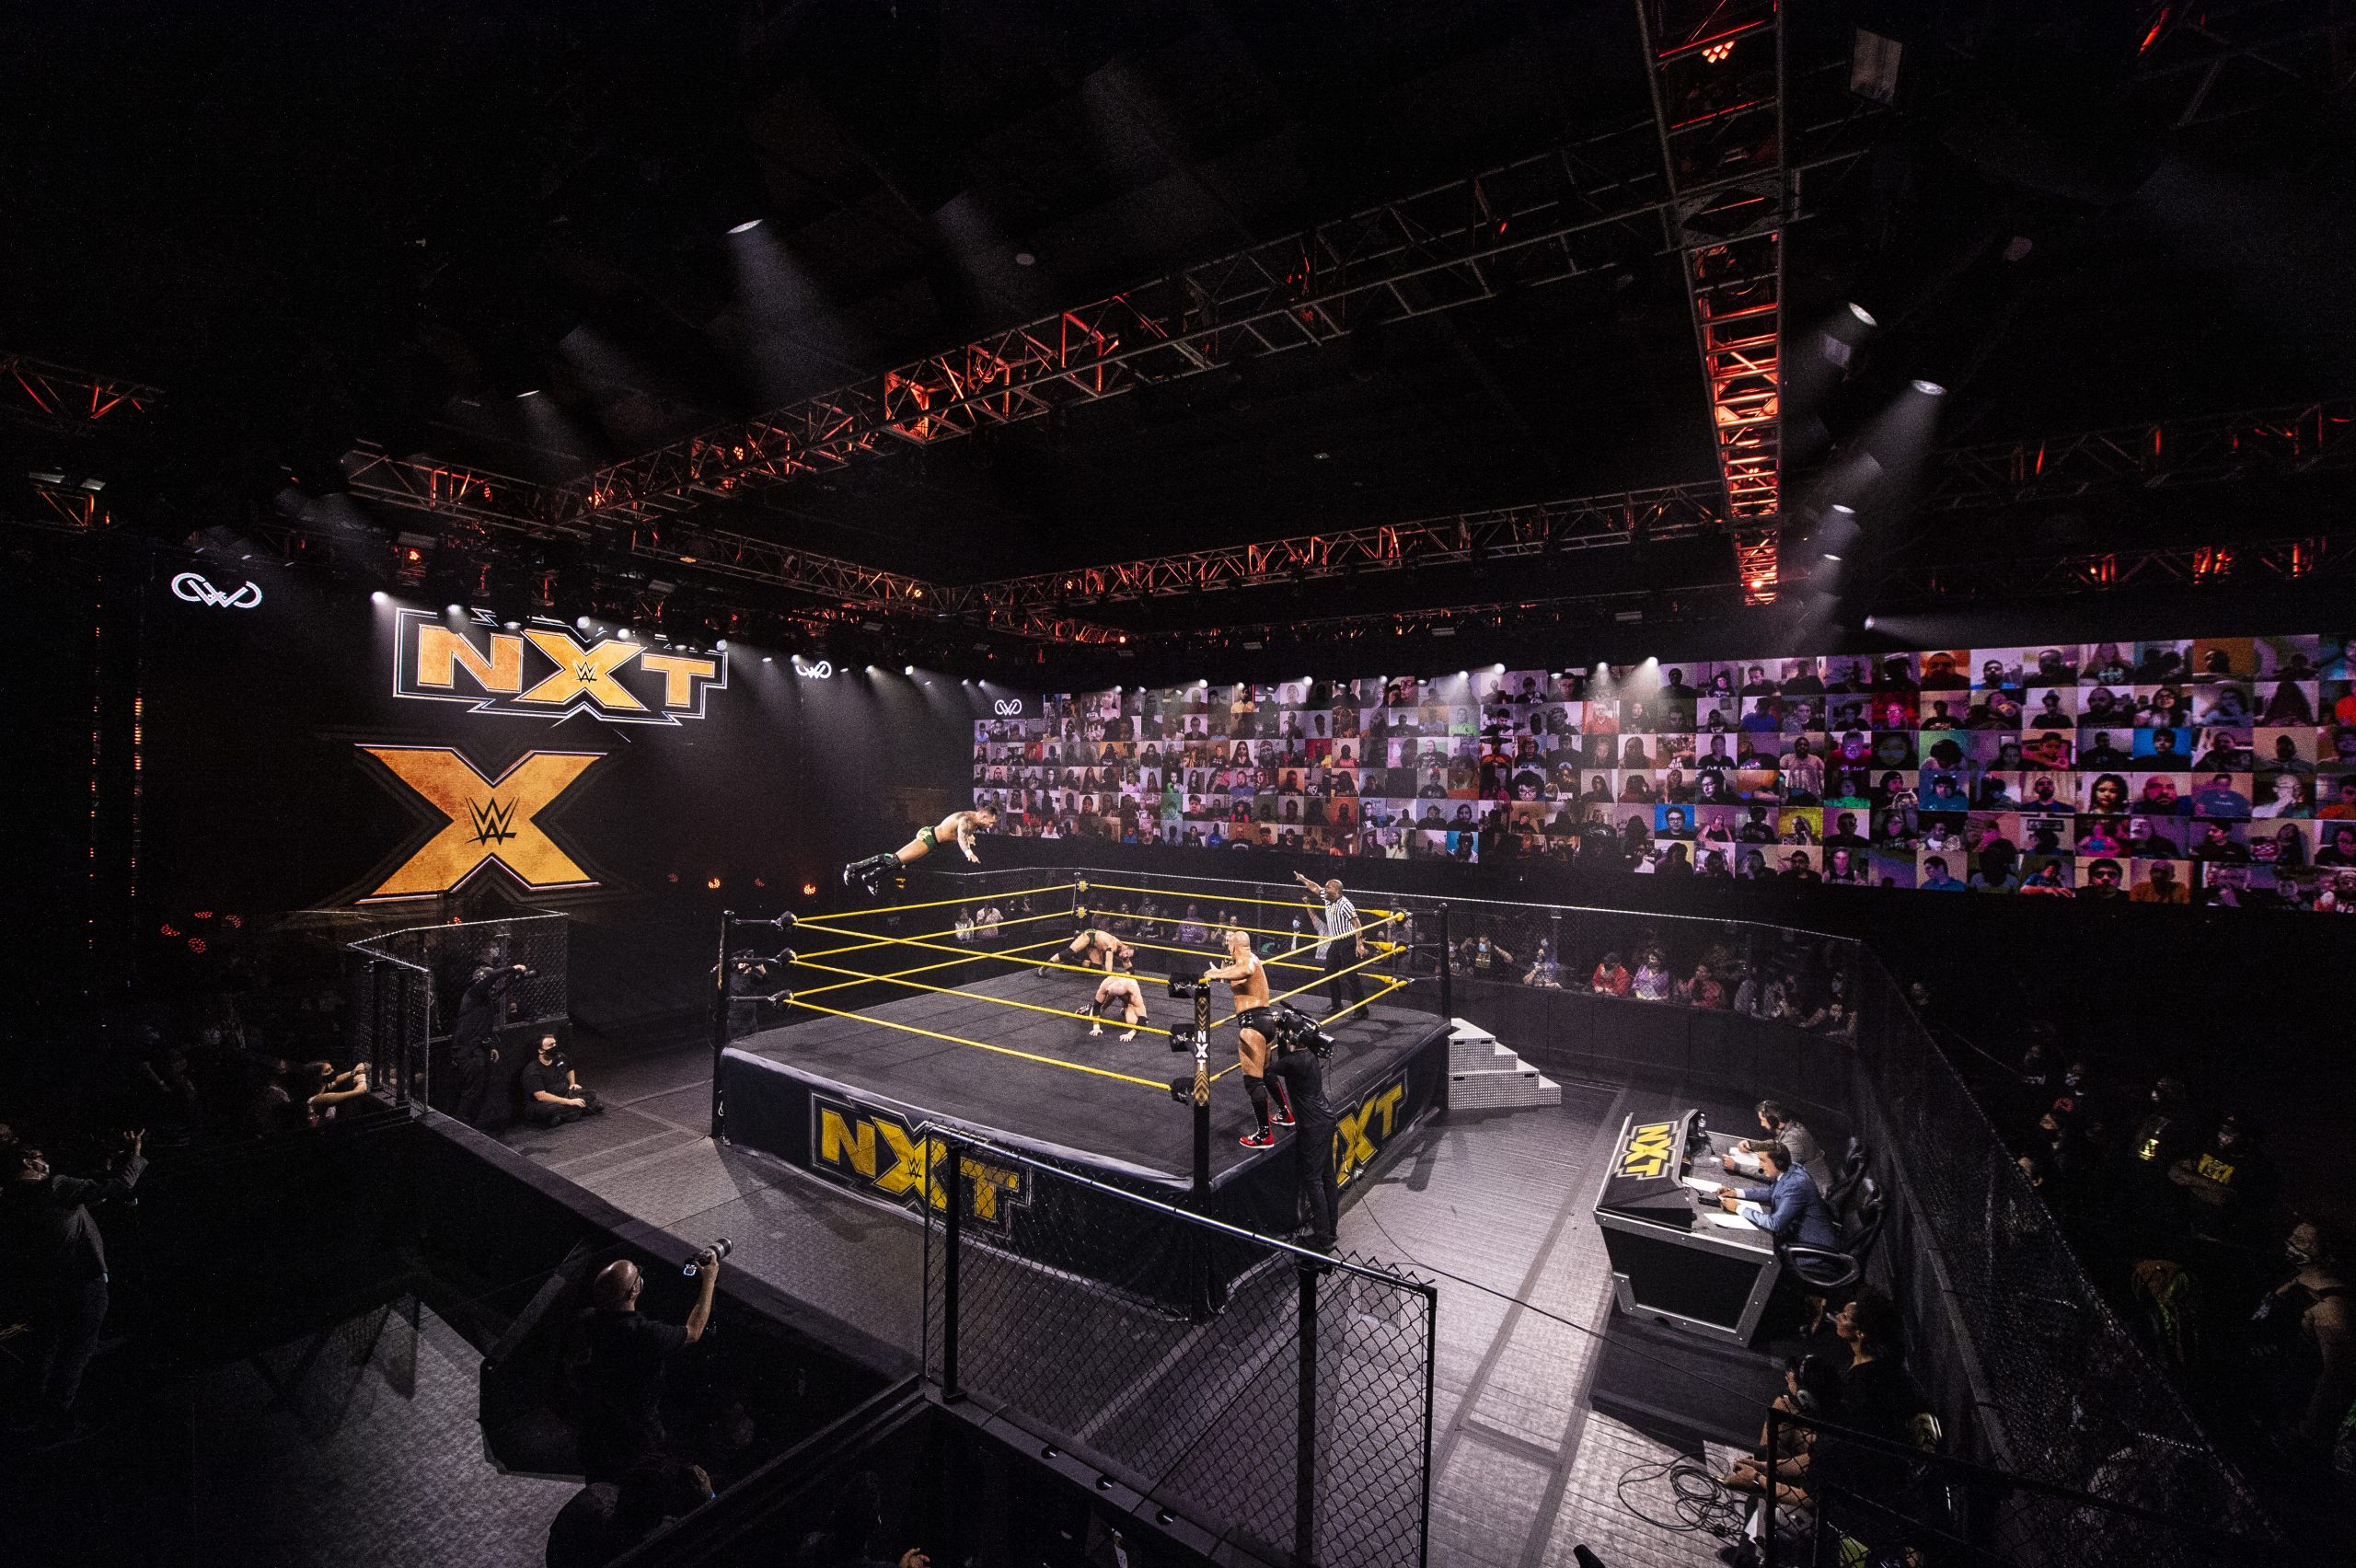 WWE, USA Network Re-Up Deal for NXT, Shift It to Tuesday Nights